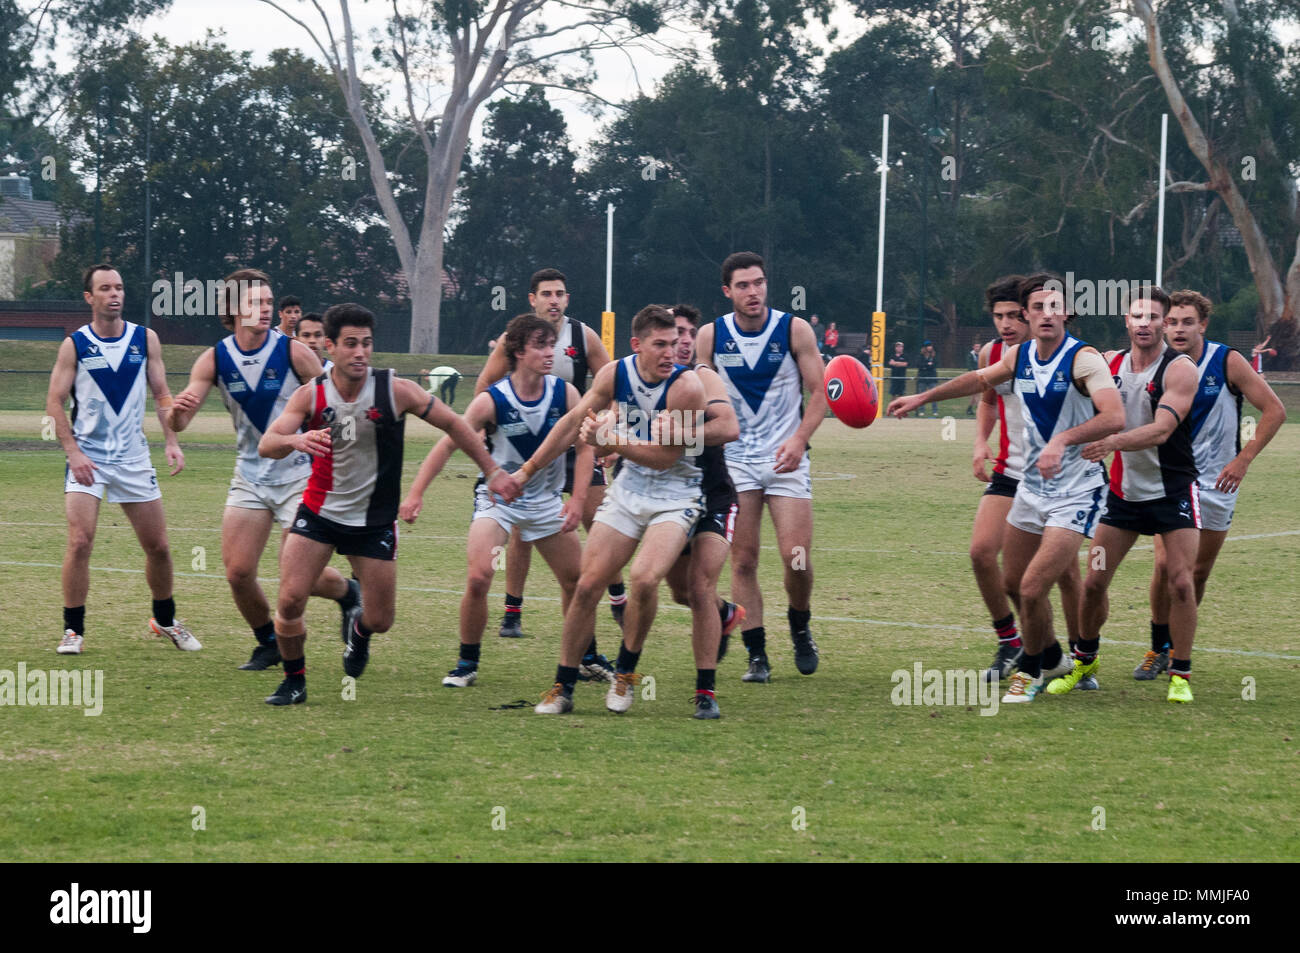 Australian Rules amateur football match at Princes Park, South Caulfield, Melbourne. The 'Aussie Rules' code originated in 19th century Melbourne. Stock Photo